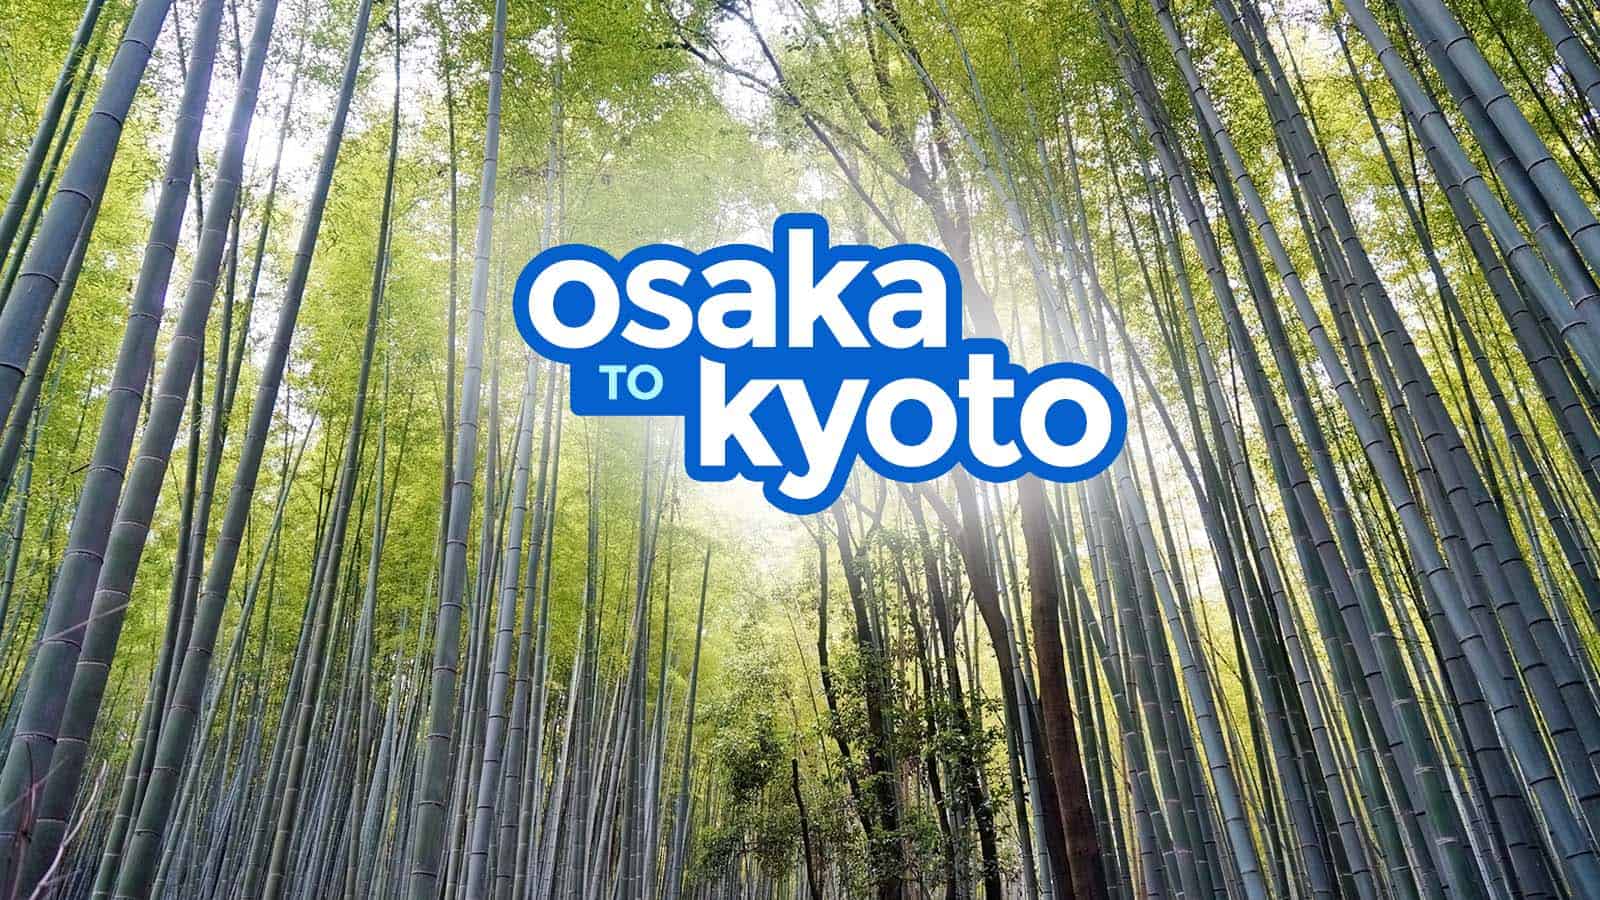 How to Get from OSAKA TO KYOTO: By Train & By Bus